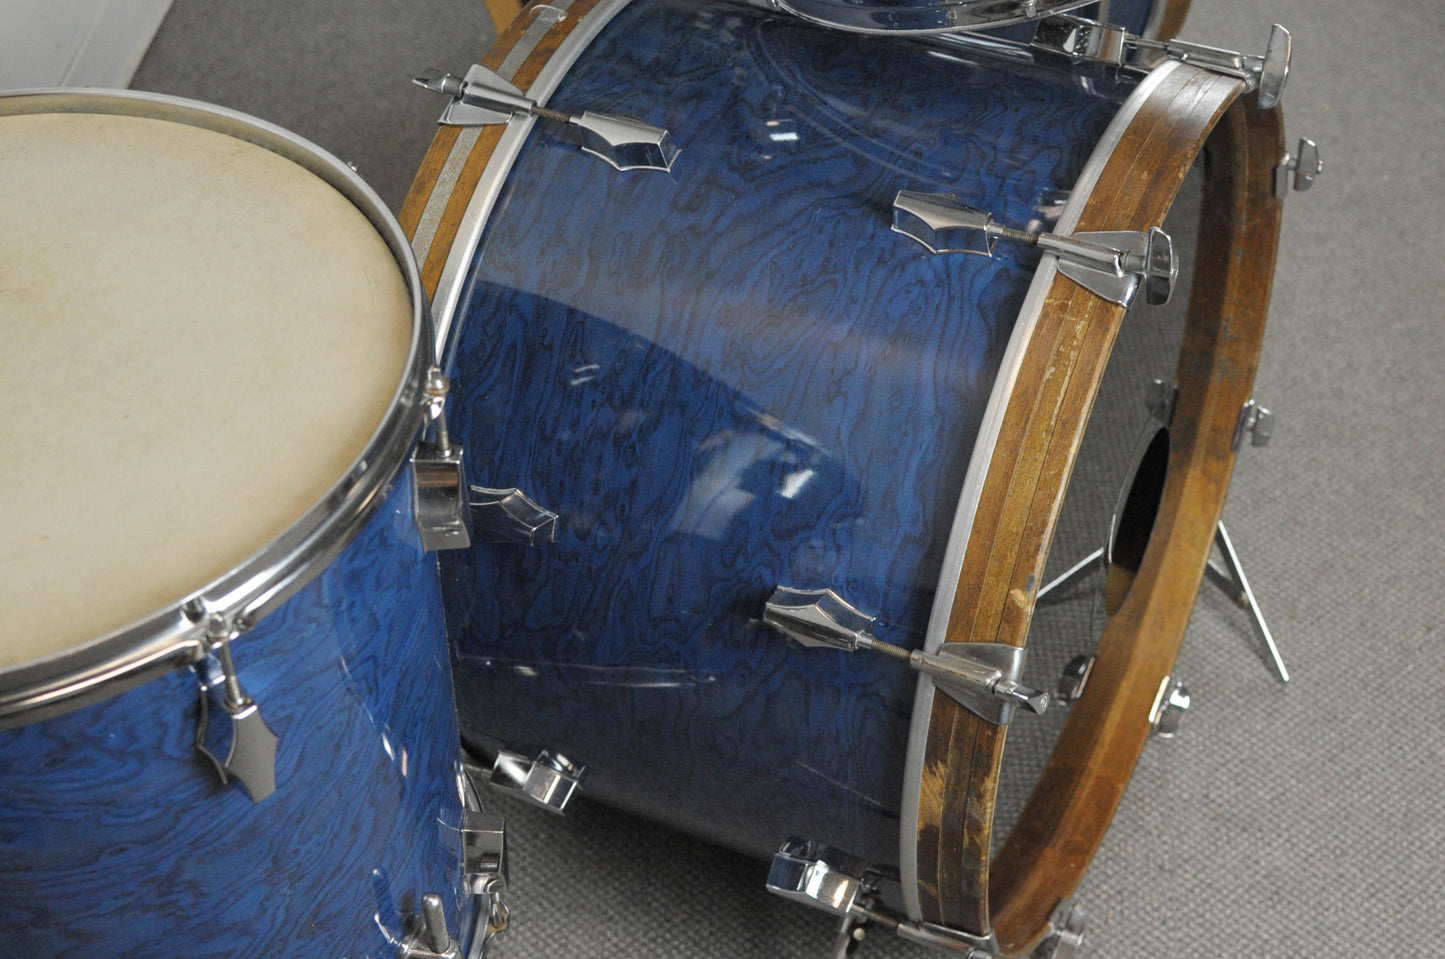 1970s Fibes "Blue Marble" Double Bass Drum Kit